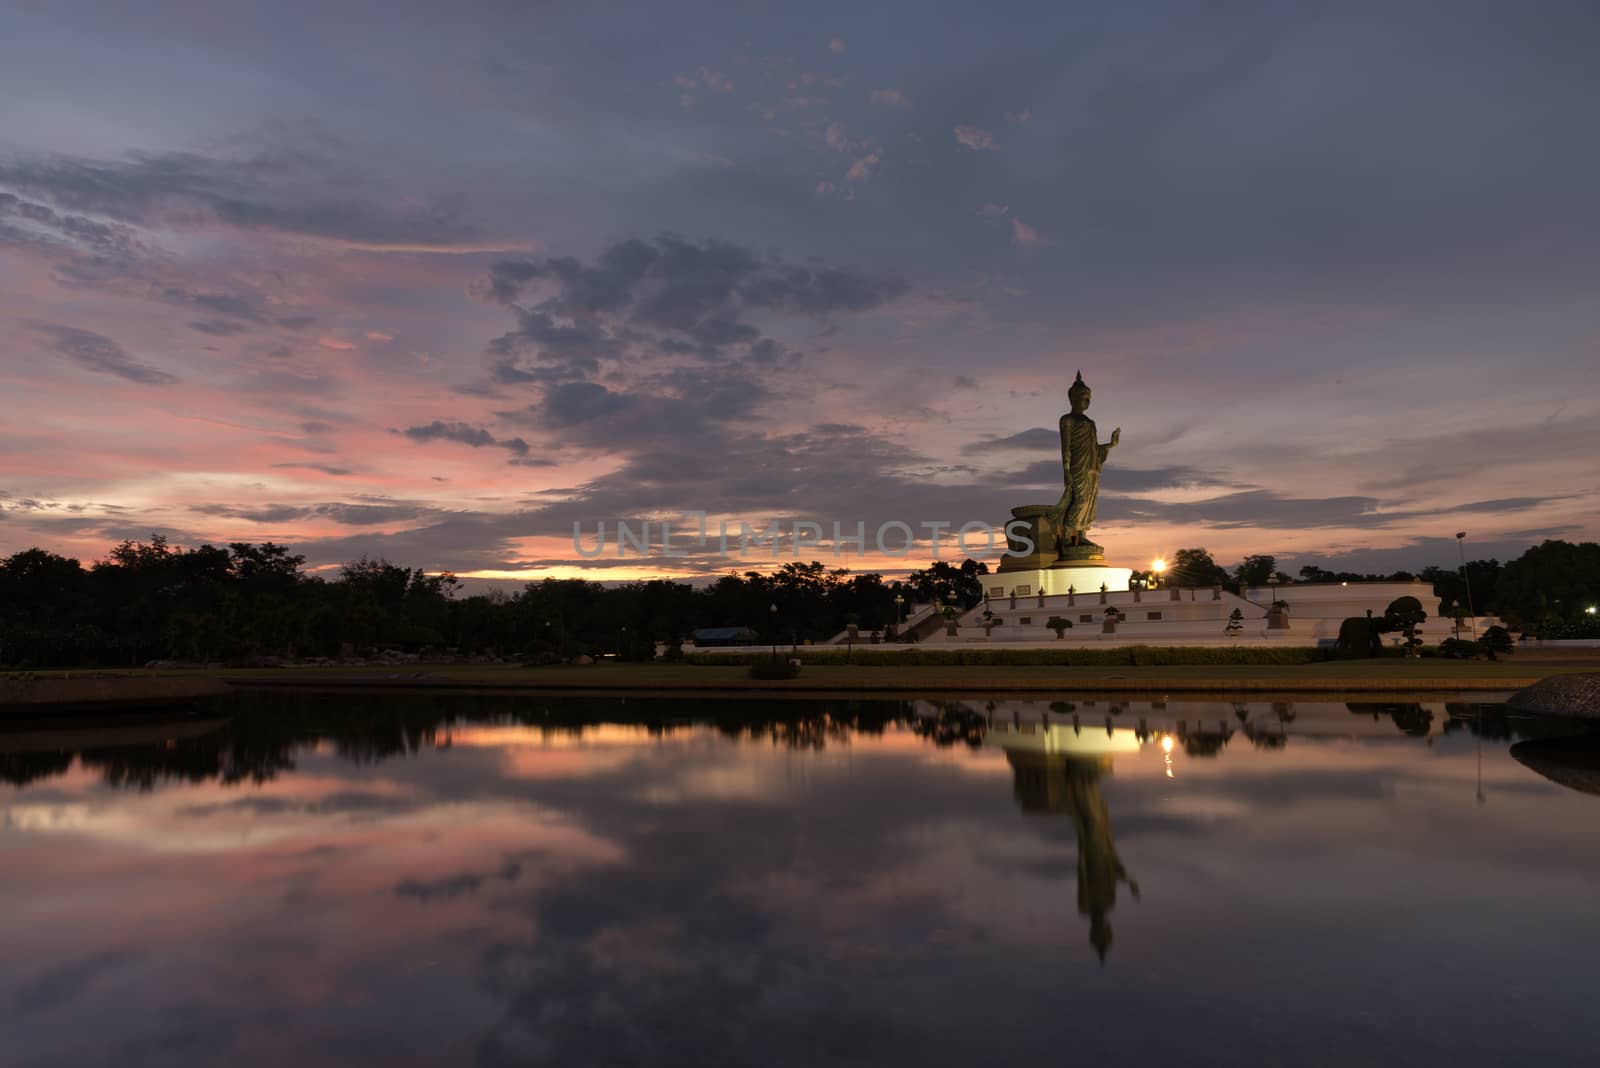 Phutthamonthon is place for Buddhist Dharma with blue sky and sunset in Nakhon Pathom Thailand.